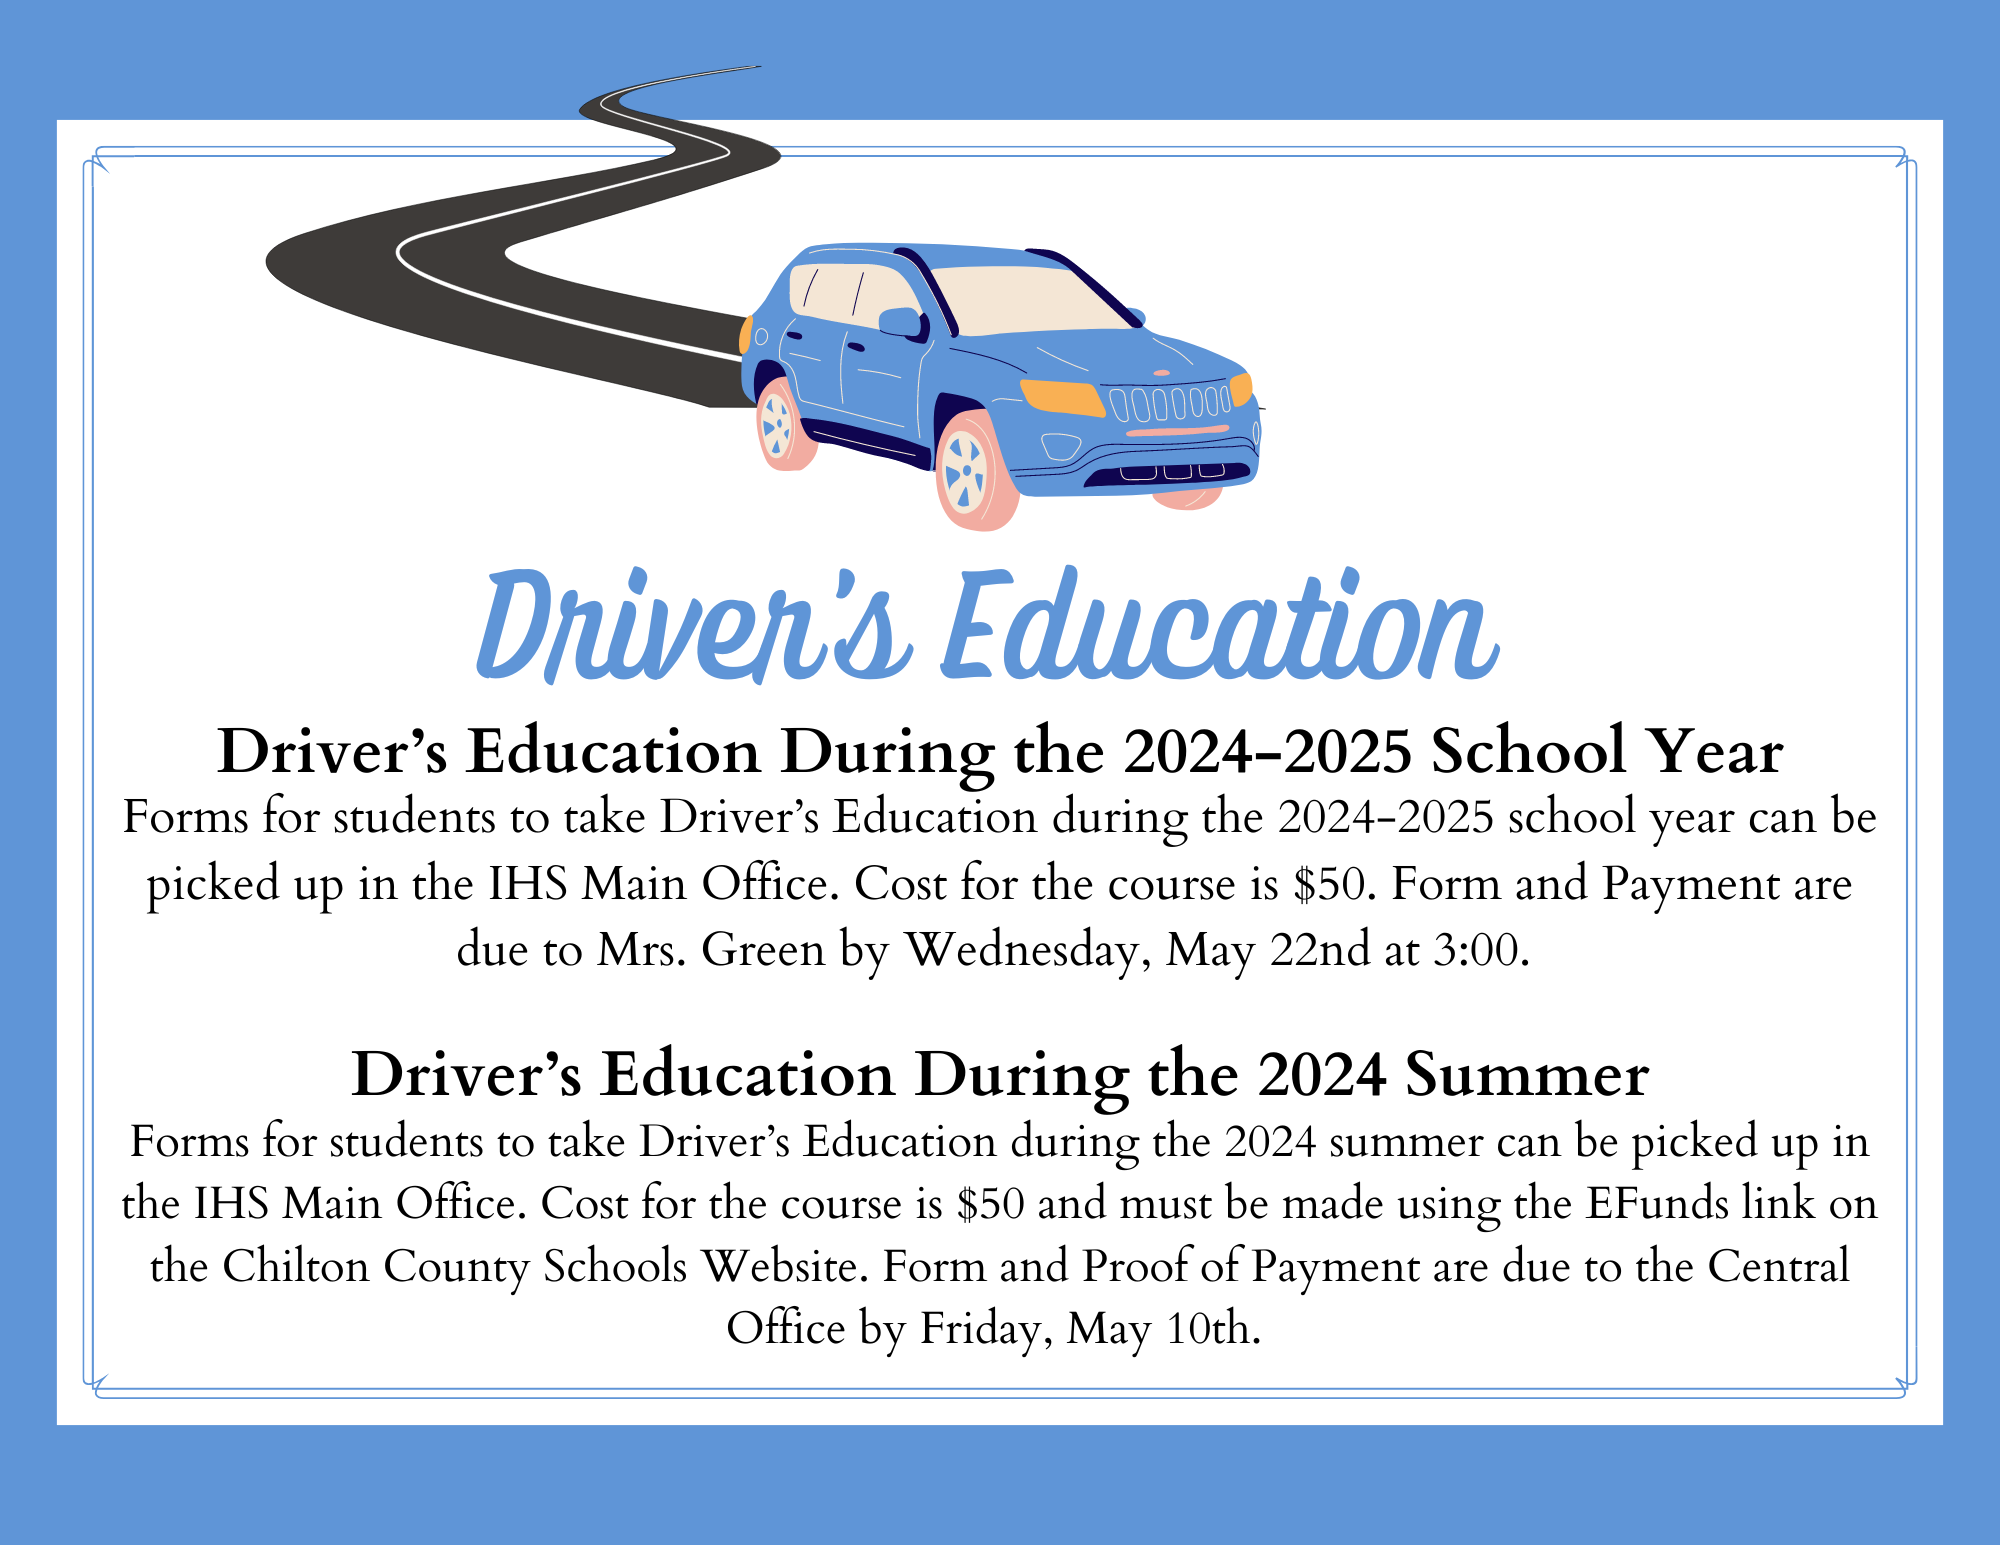 Driver's Education Flyer